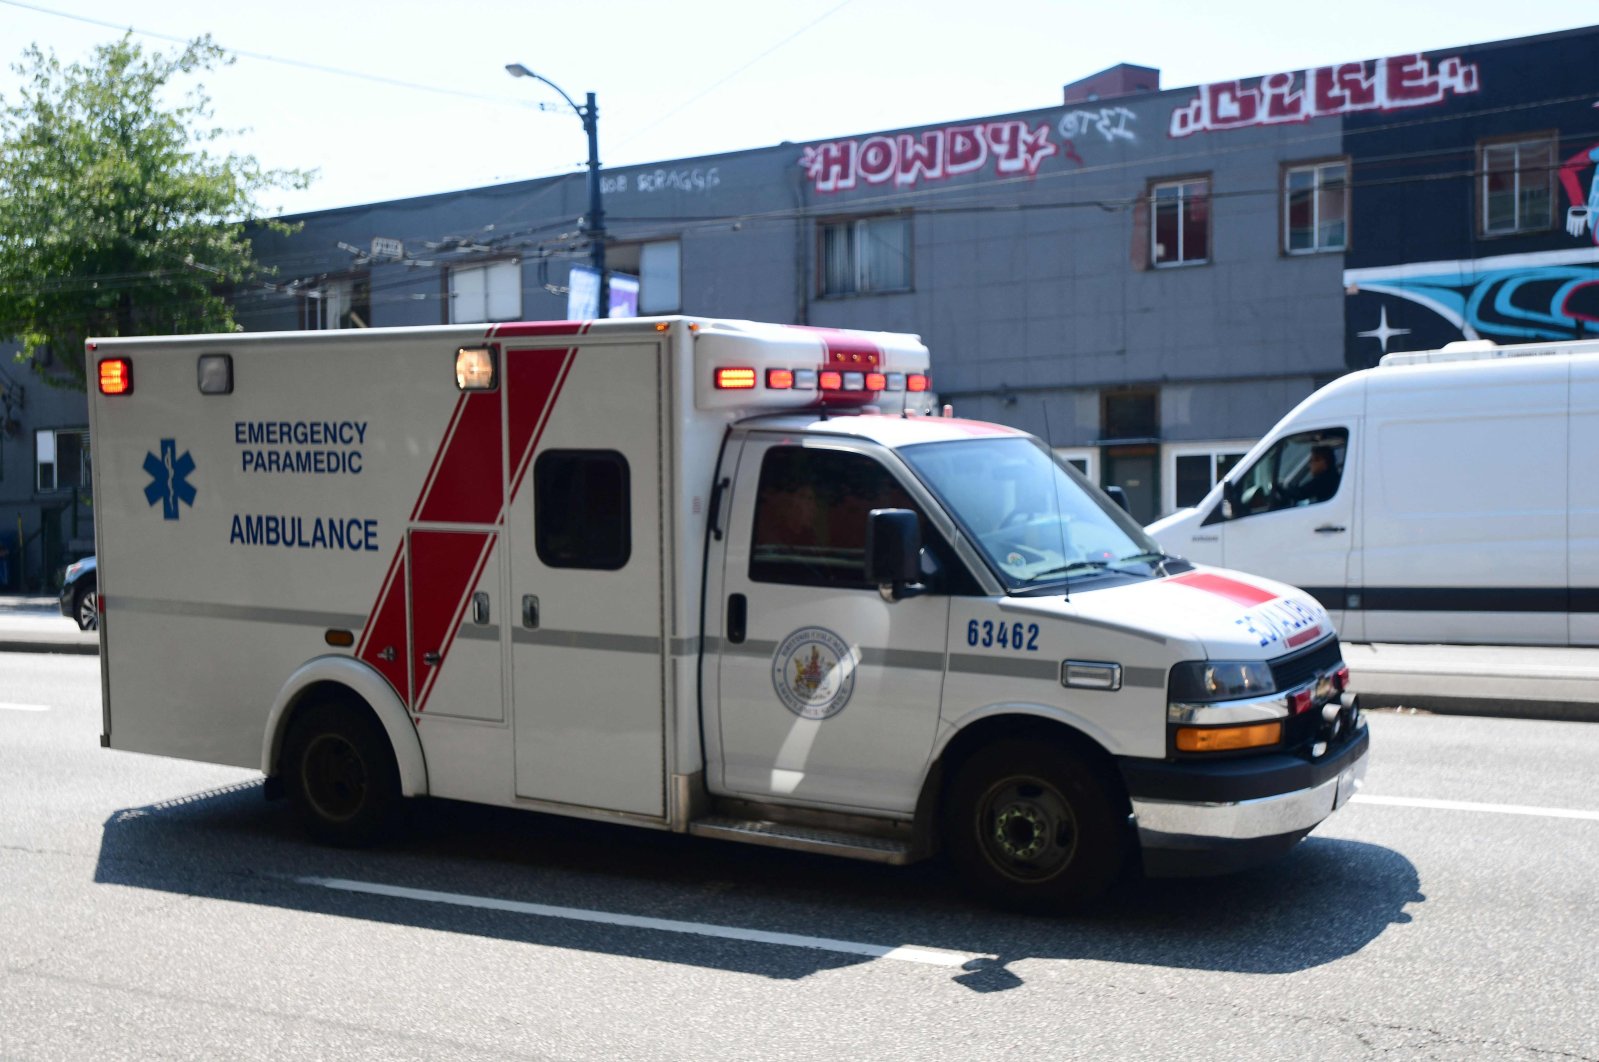 An ambulance is seen during the extreme hot weather in Vancouver, British Columbia, Canada, June 30, 2021. (AFP Photo)